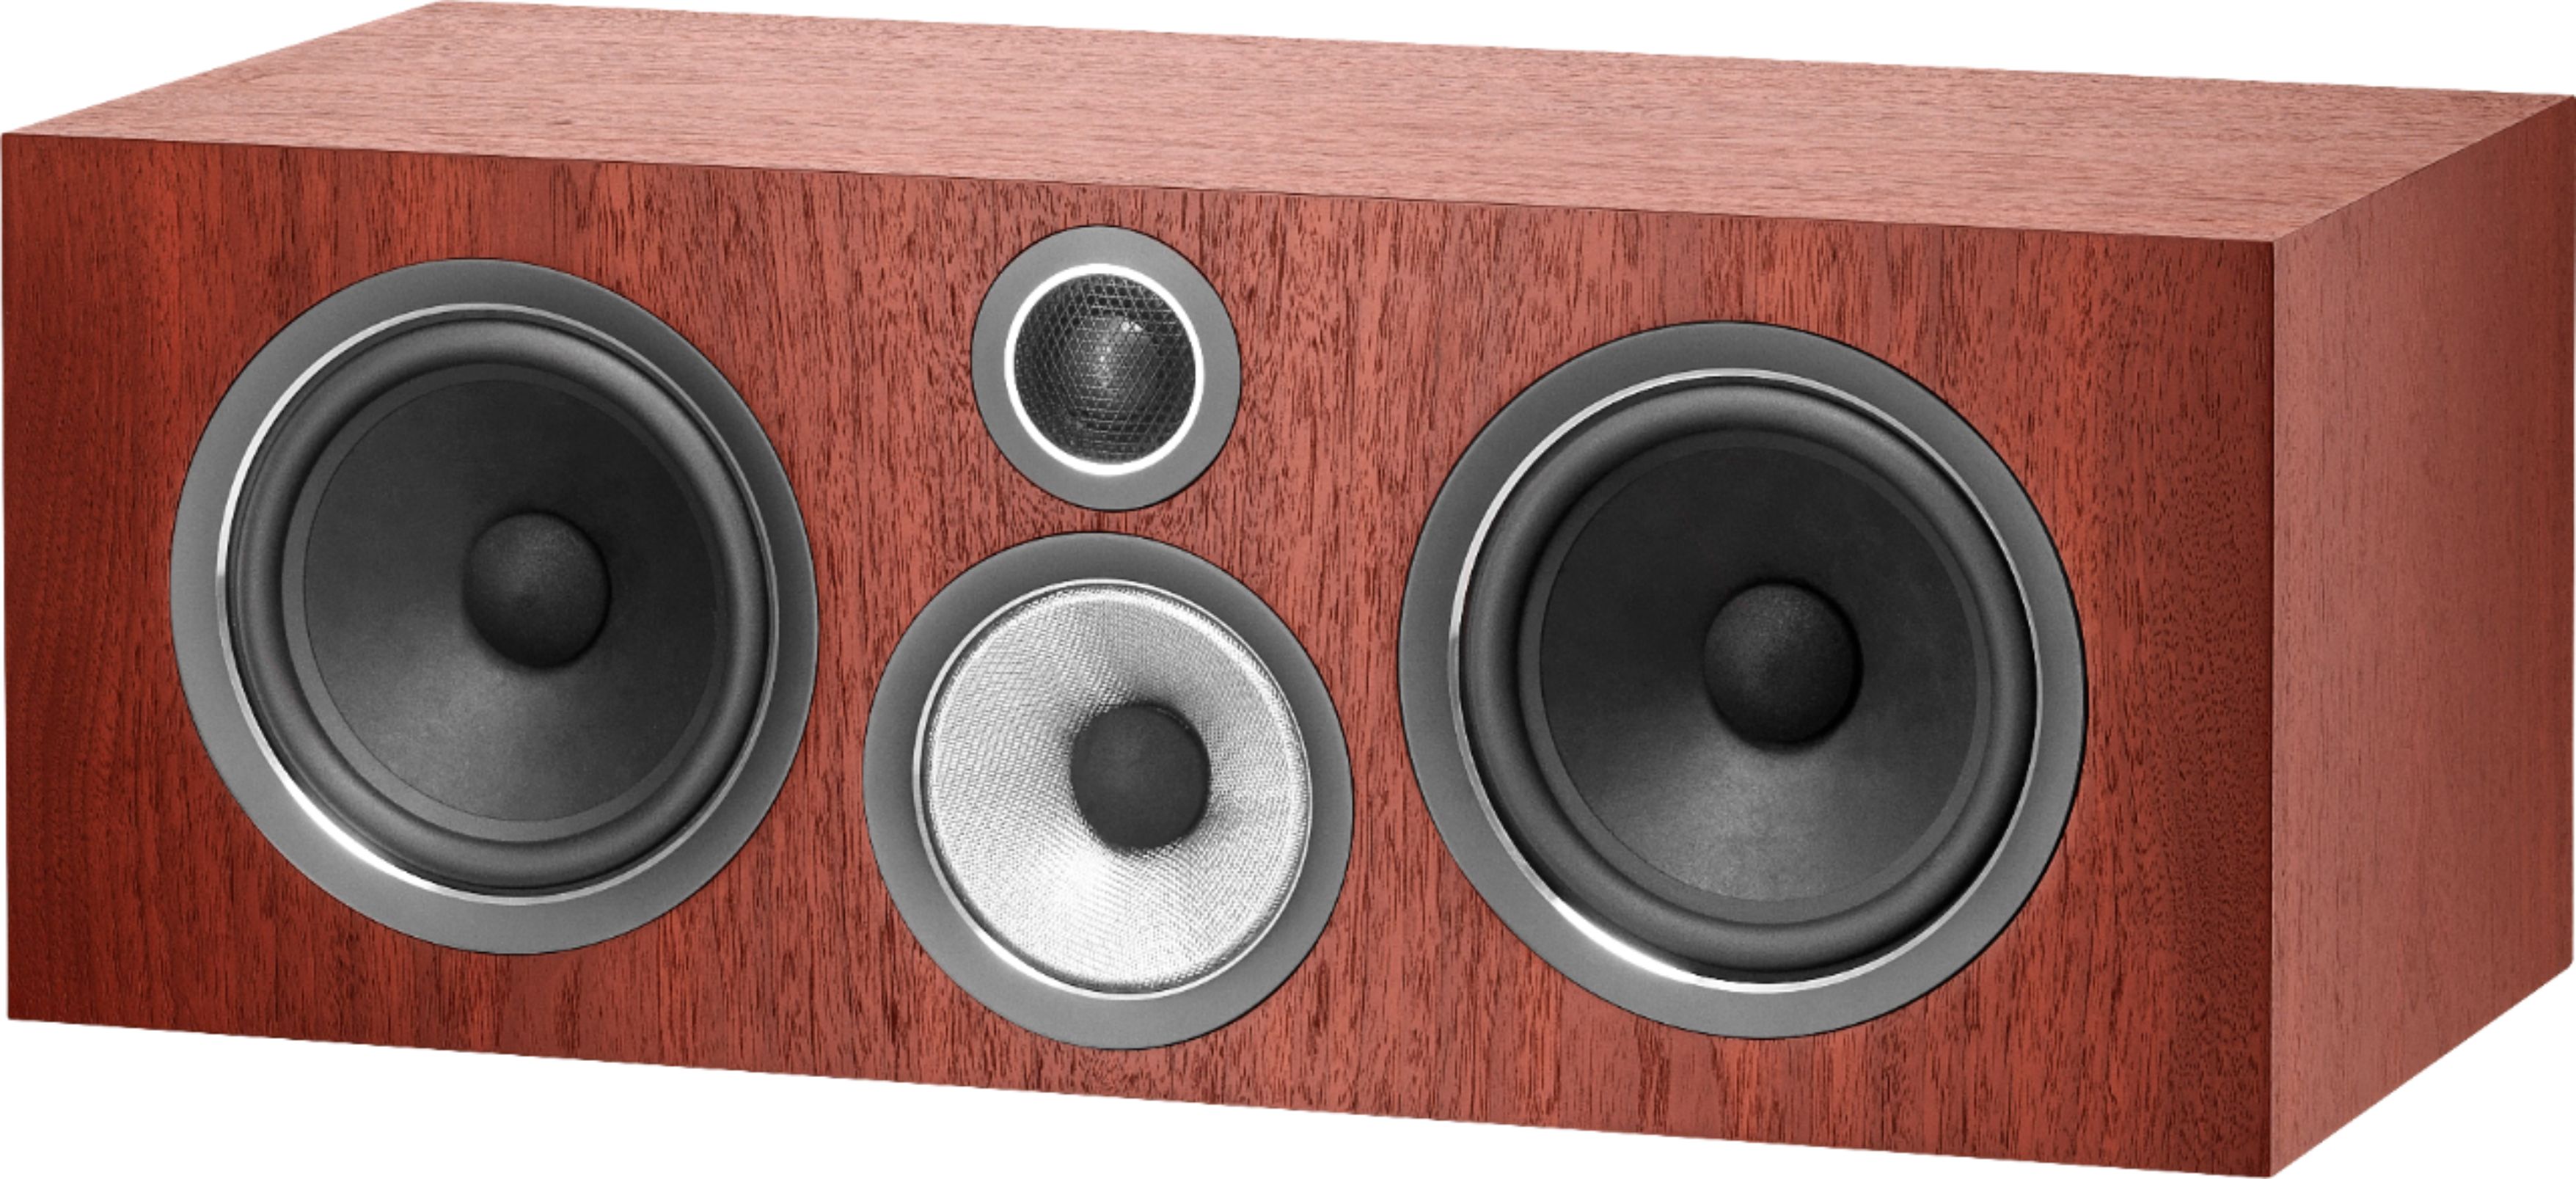 Angle View: Bowers & Wilkins - 700 Series 3-way Center Channel w/4" midrange, dual 6.5" bass (each) - Rosenut